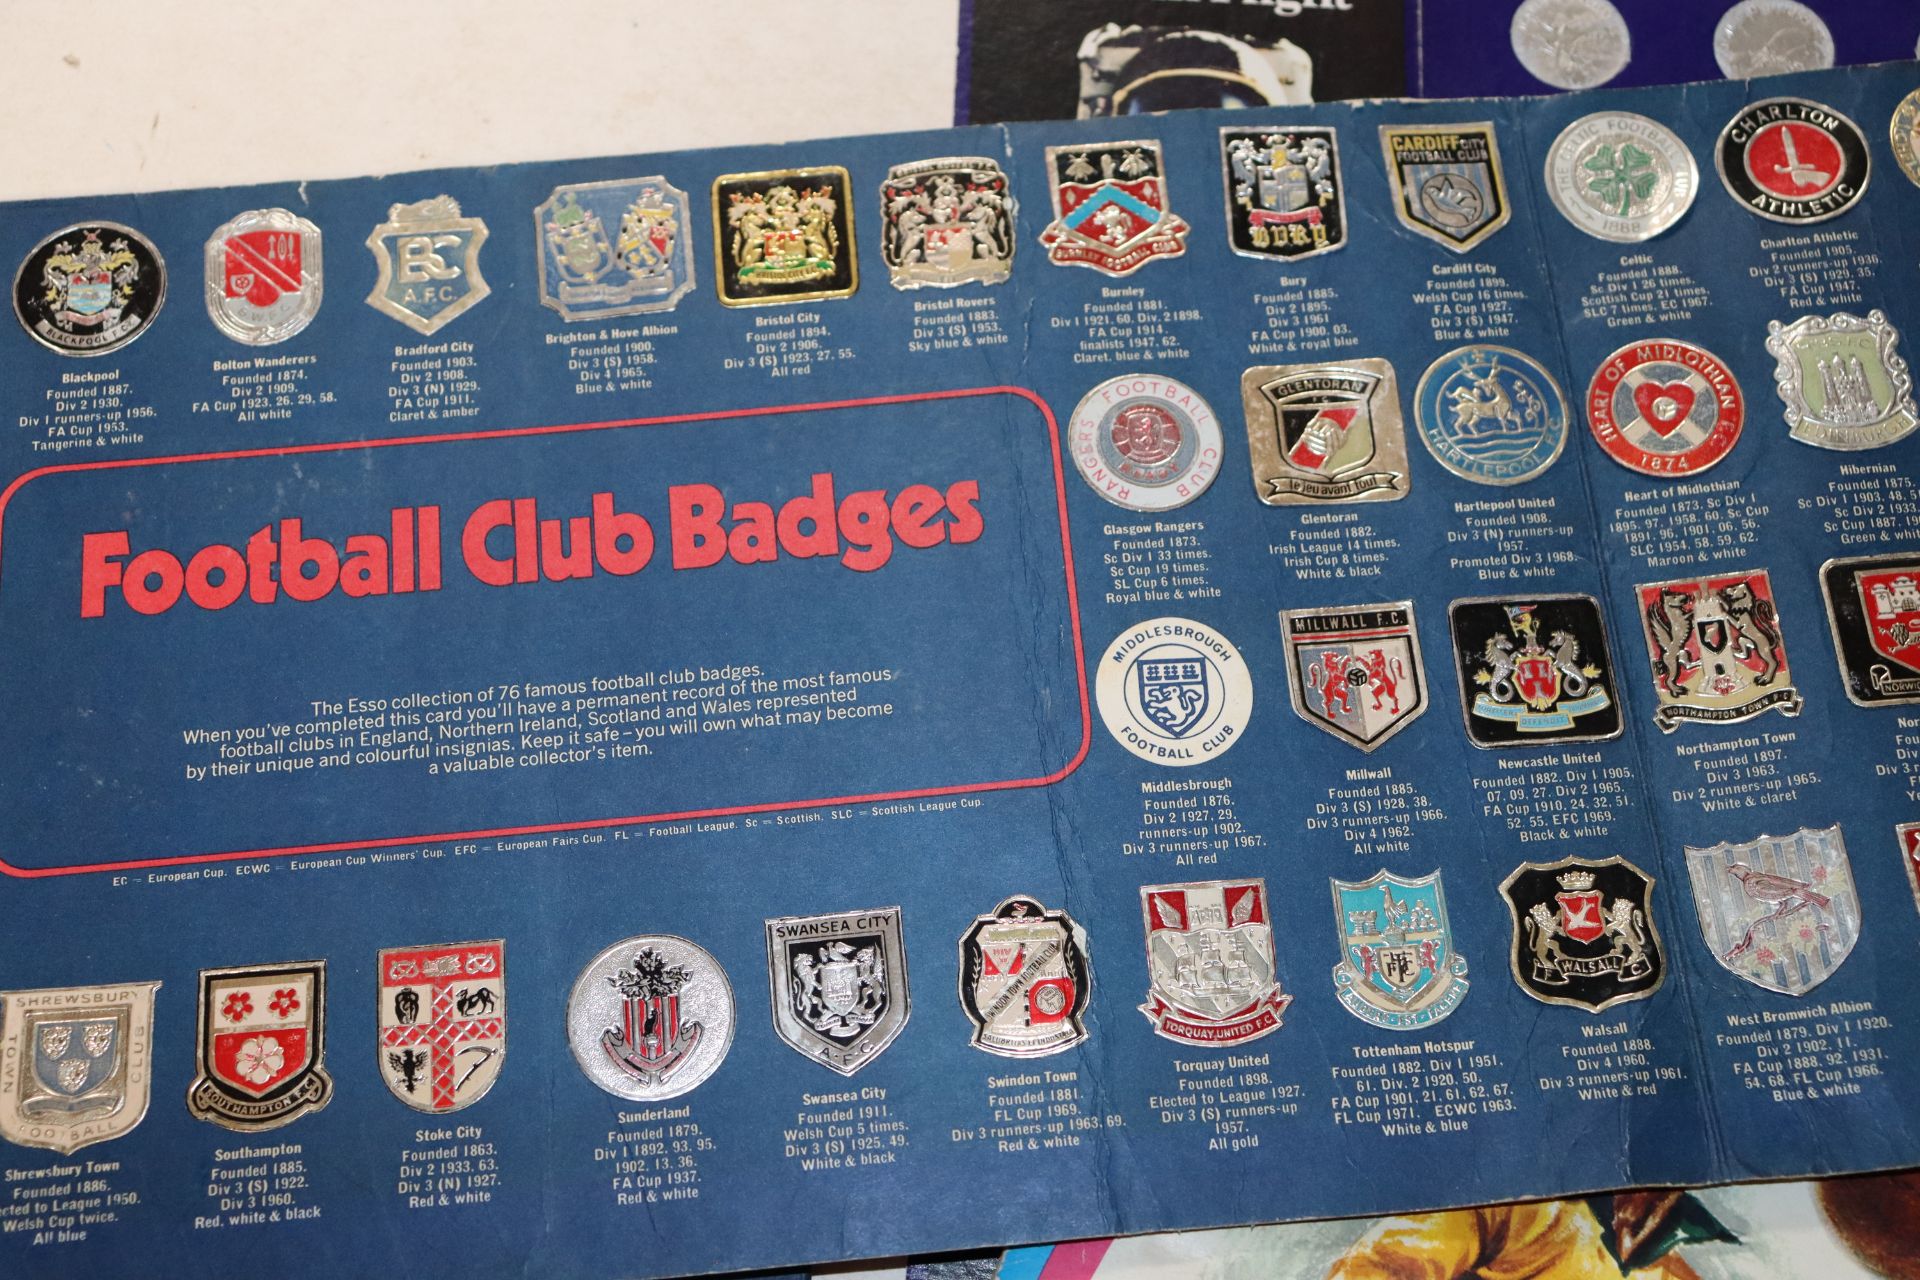 A quantity of collectors coins, Ipswich Town sticker album, World Cup 1974 soccer stars album etc - Image 11 of 12